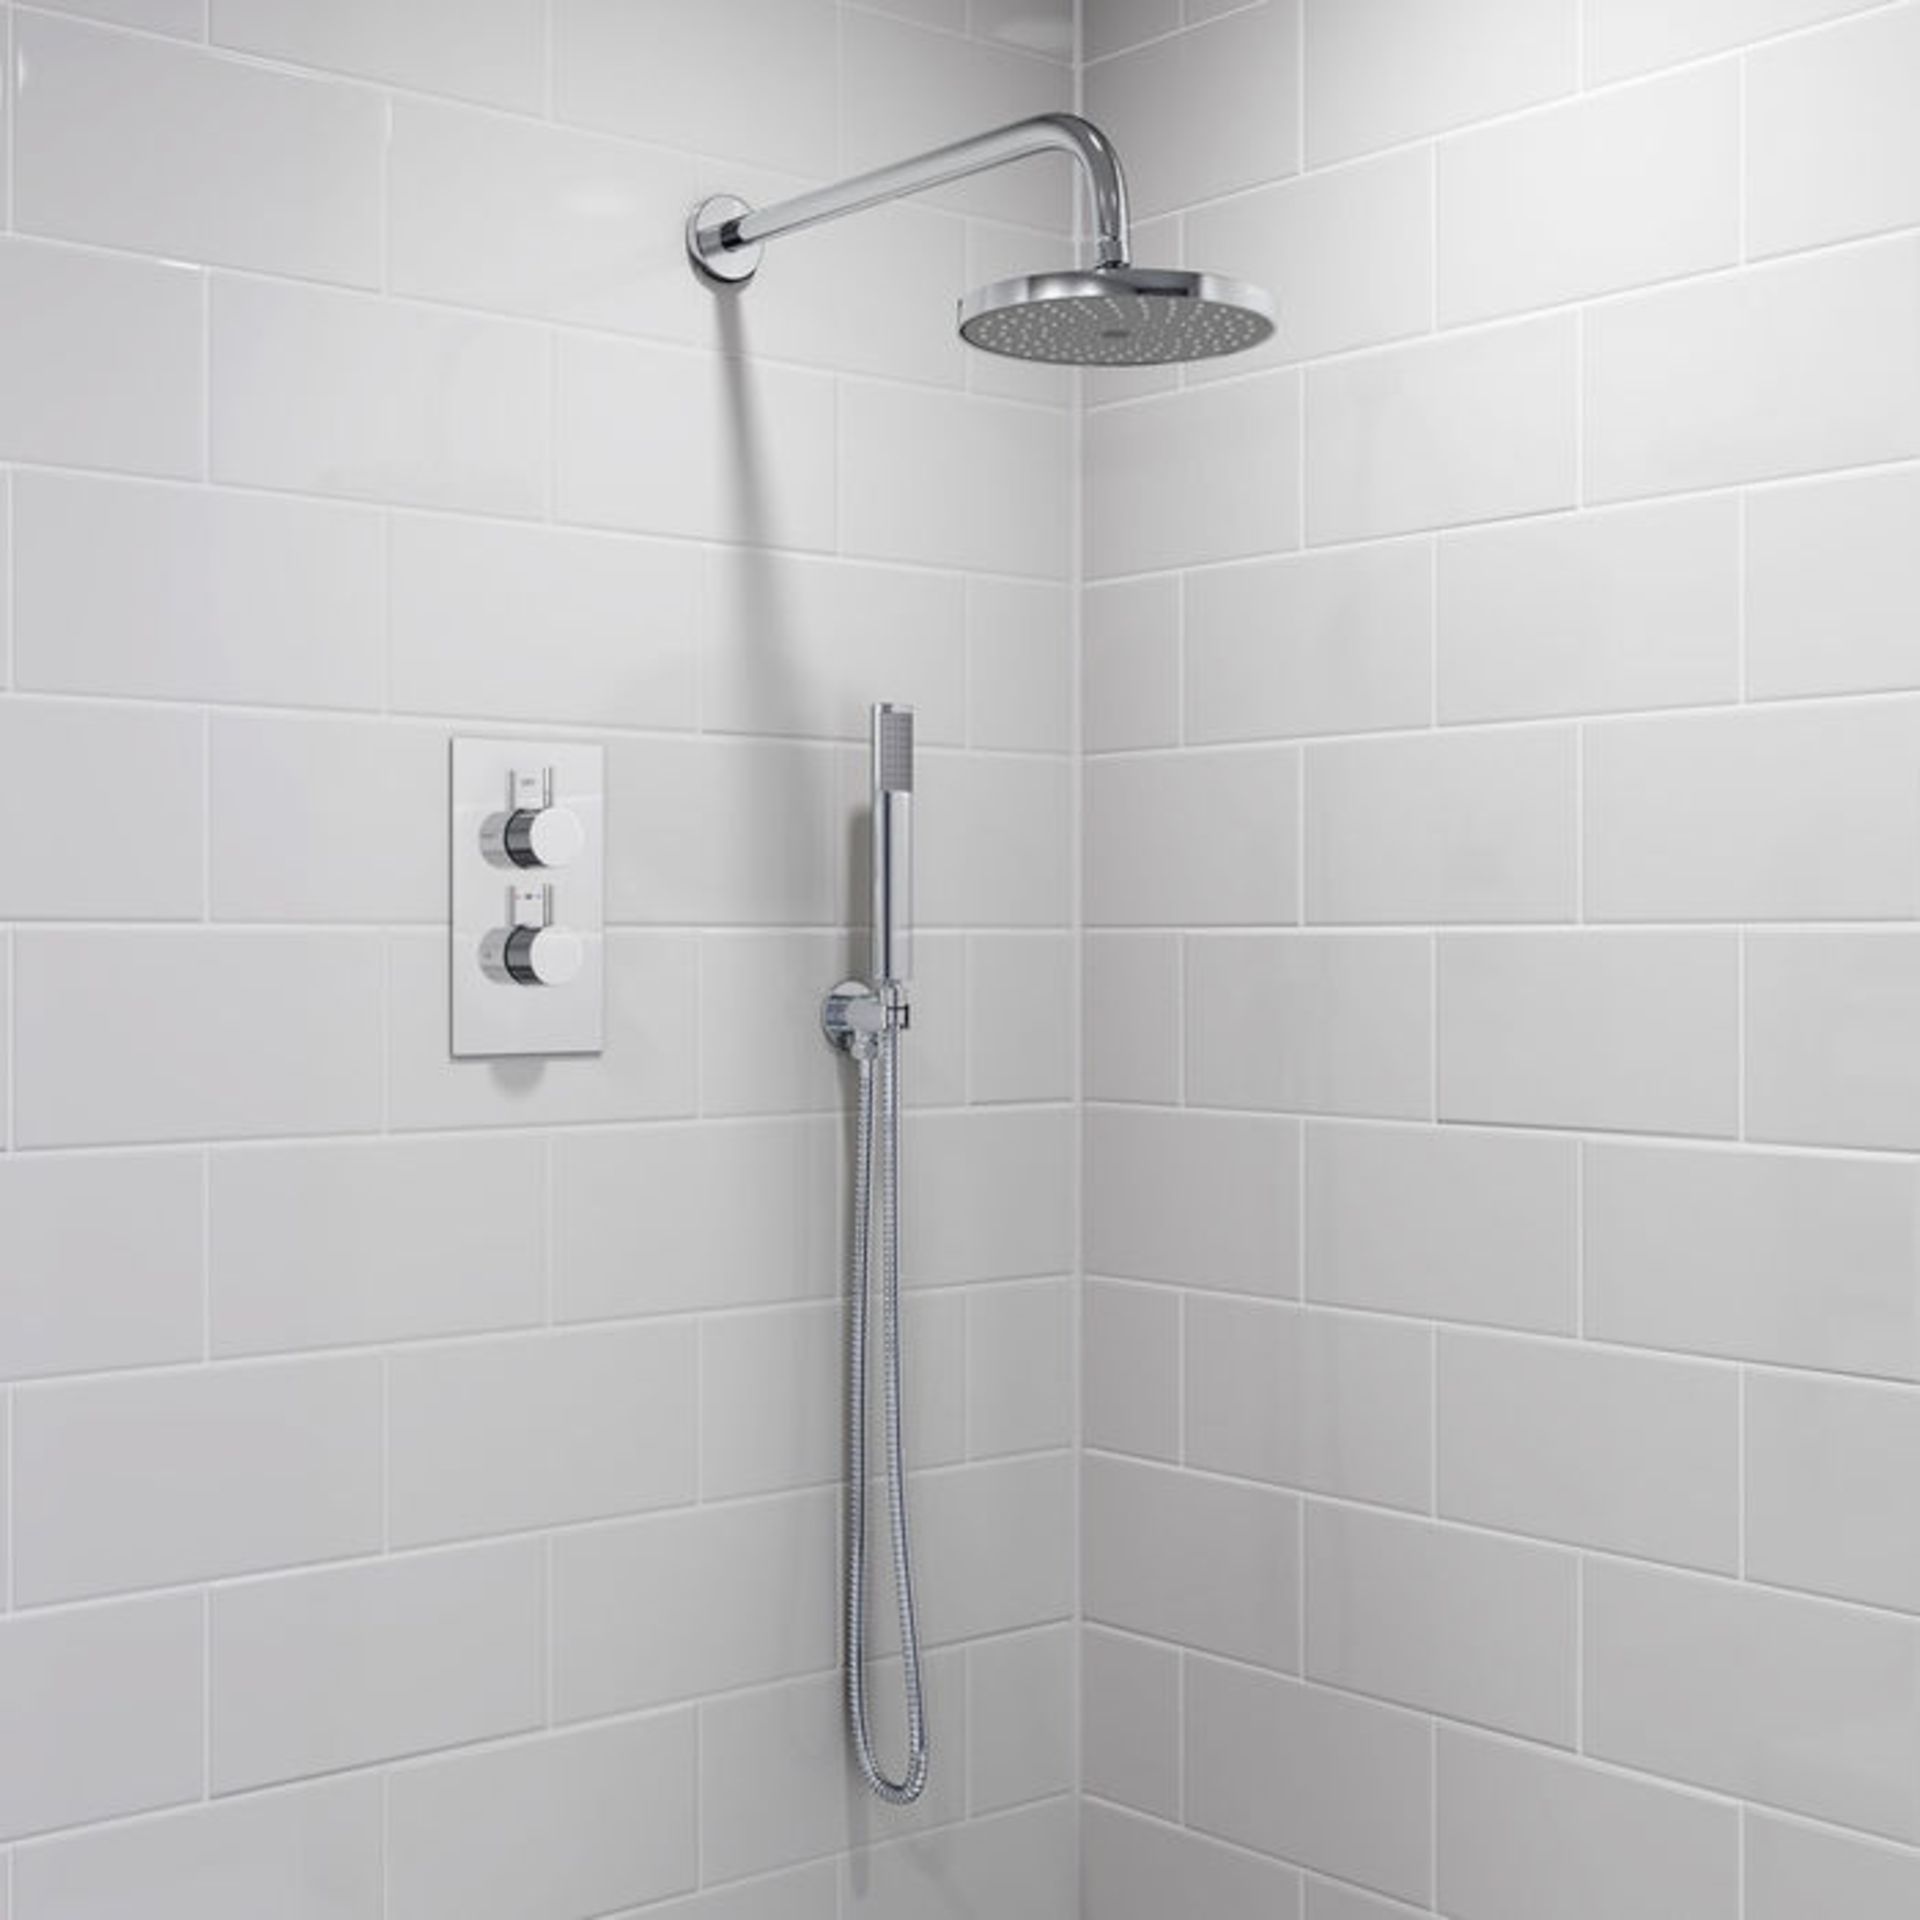 (AL27) Round Concealed Thermostatic Mixer Shower Kit & Medium Head. Family friendly detachable - Image 4 of 4